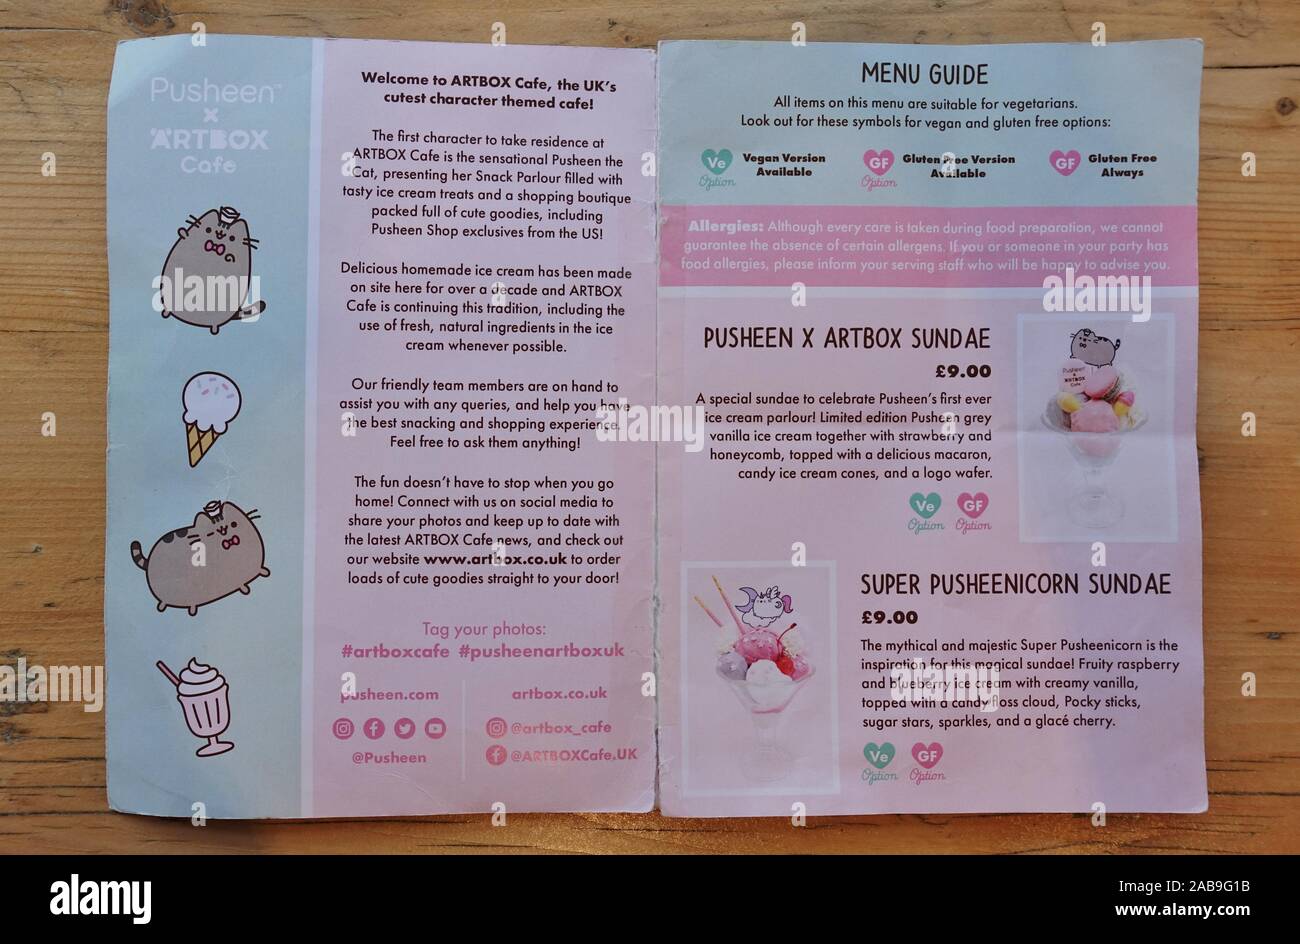 BRIGHTON, UNITED KINGDOM -28 SEP 2019- View of the Pusheen Snack Parlour Artbox café, a cute coffee shop in Brighton, England, decorated with Pusheen Stock Photo